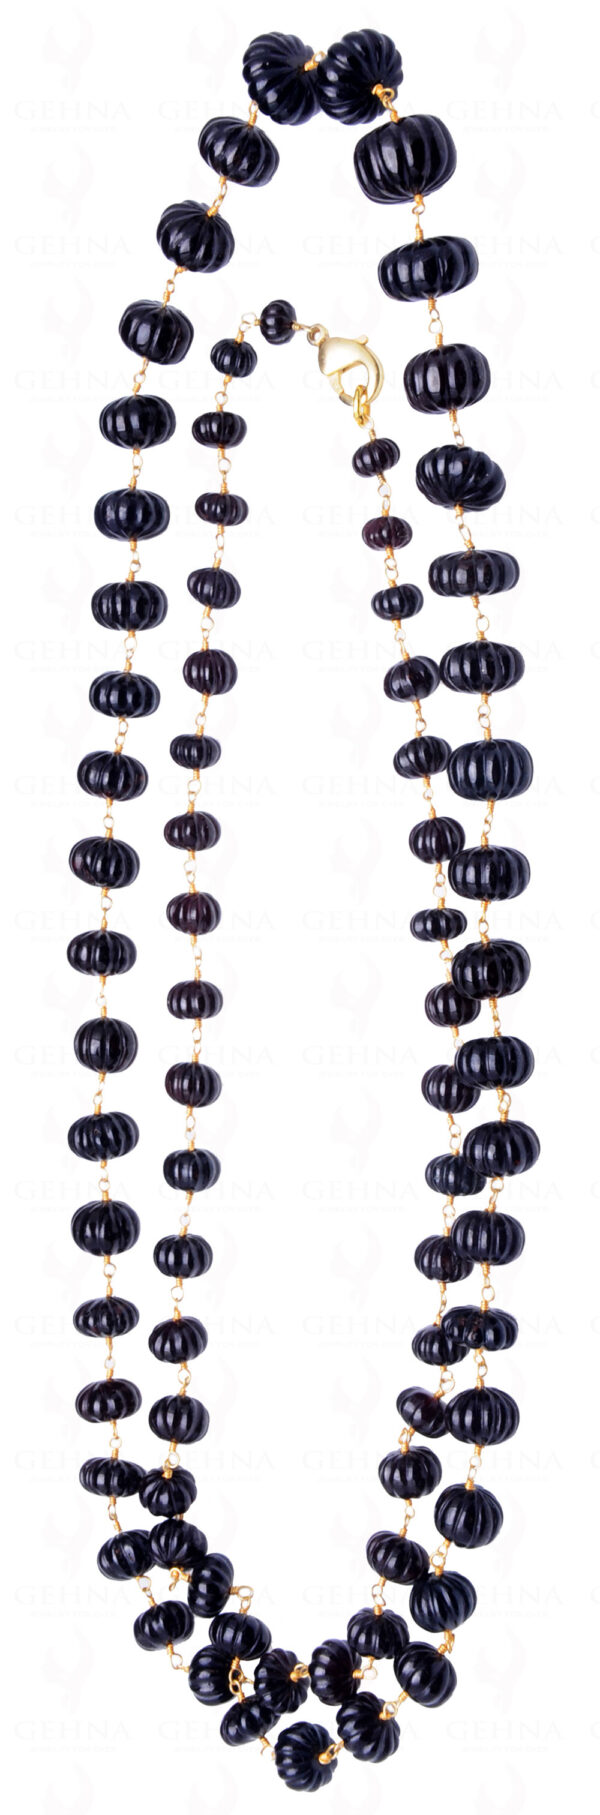 Hessonite (Gomed) Gemstone Melon Shaped Bead Chain Linked In Silver CP-1059